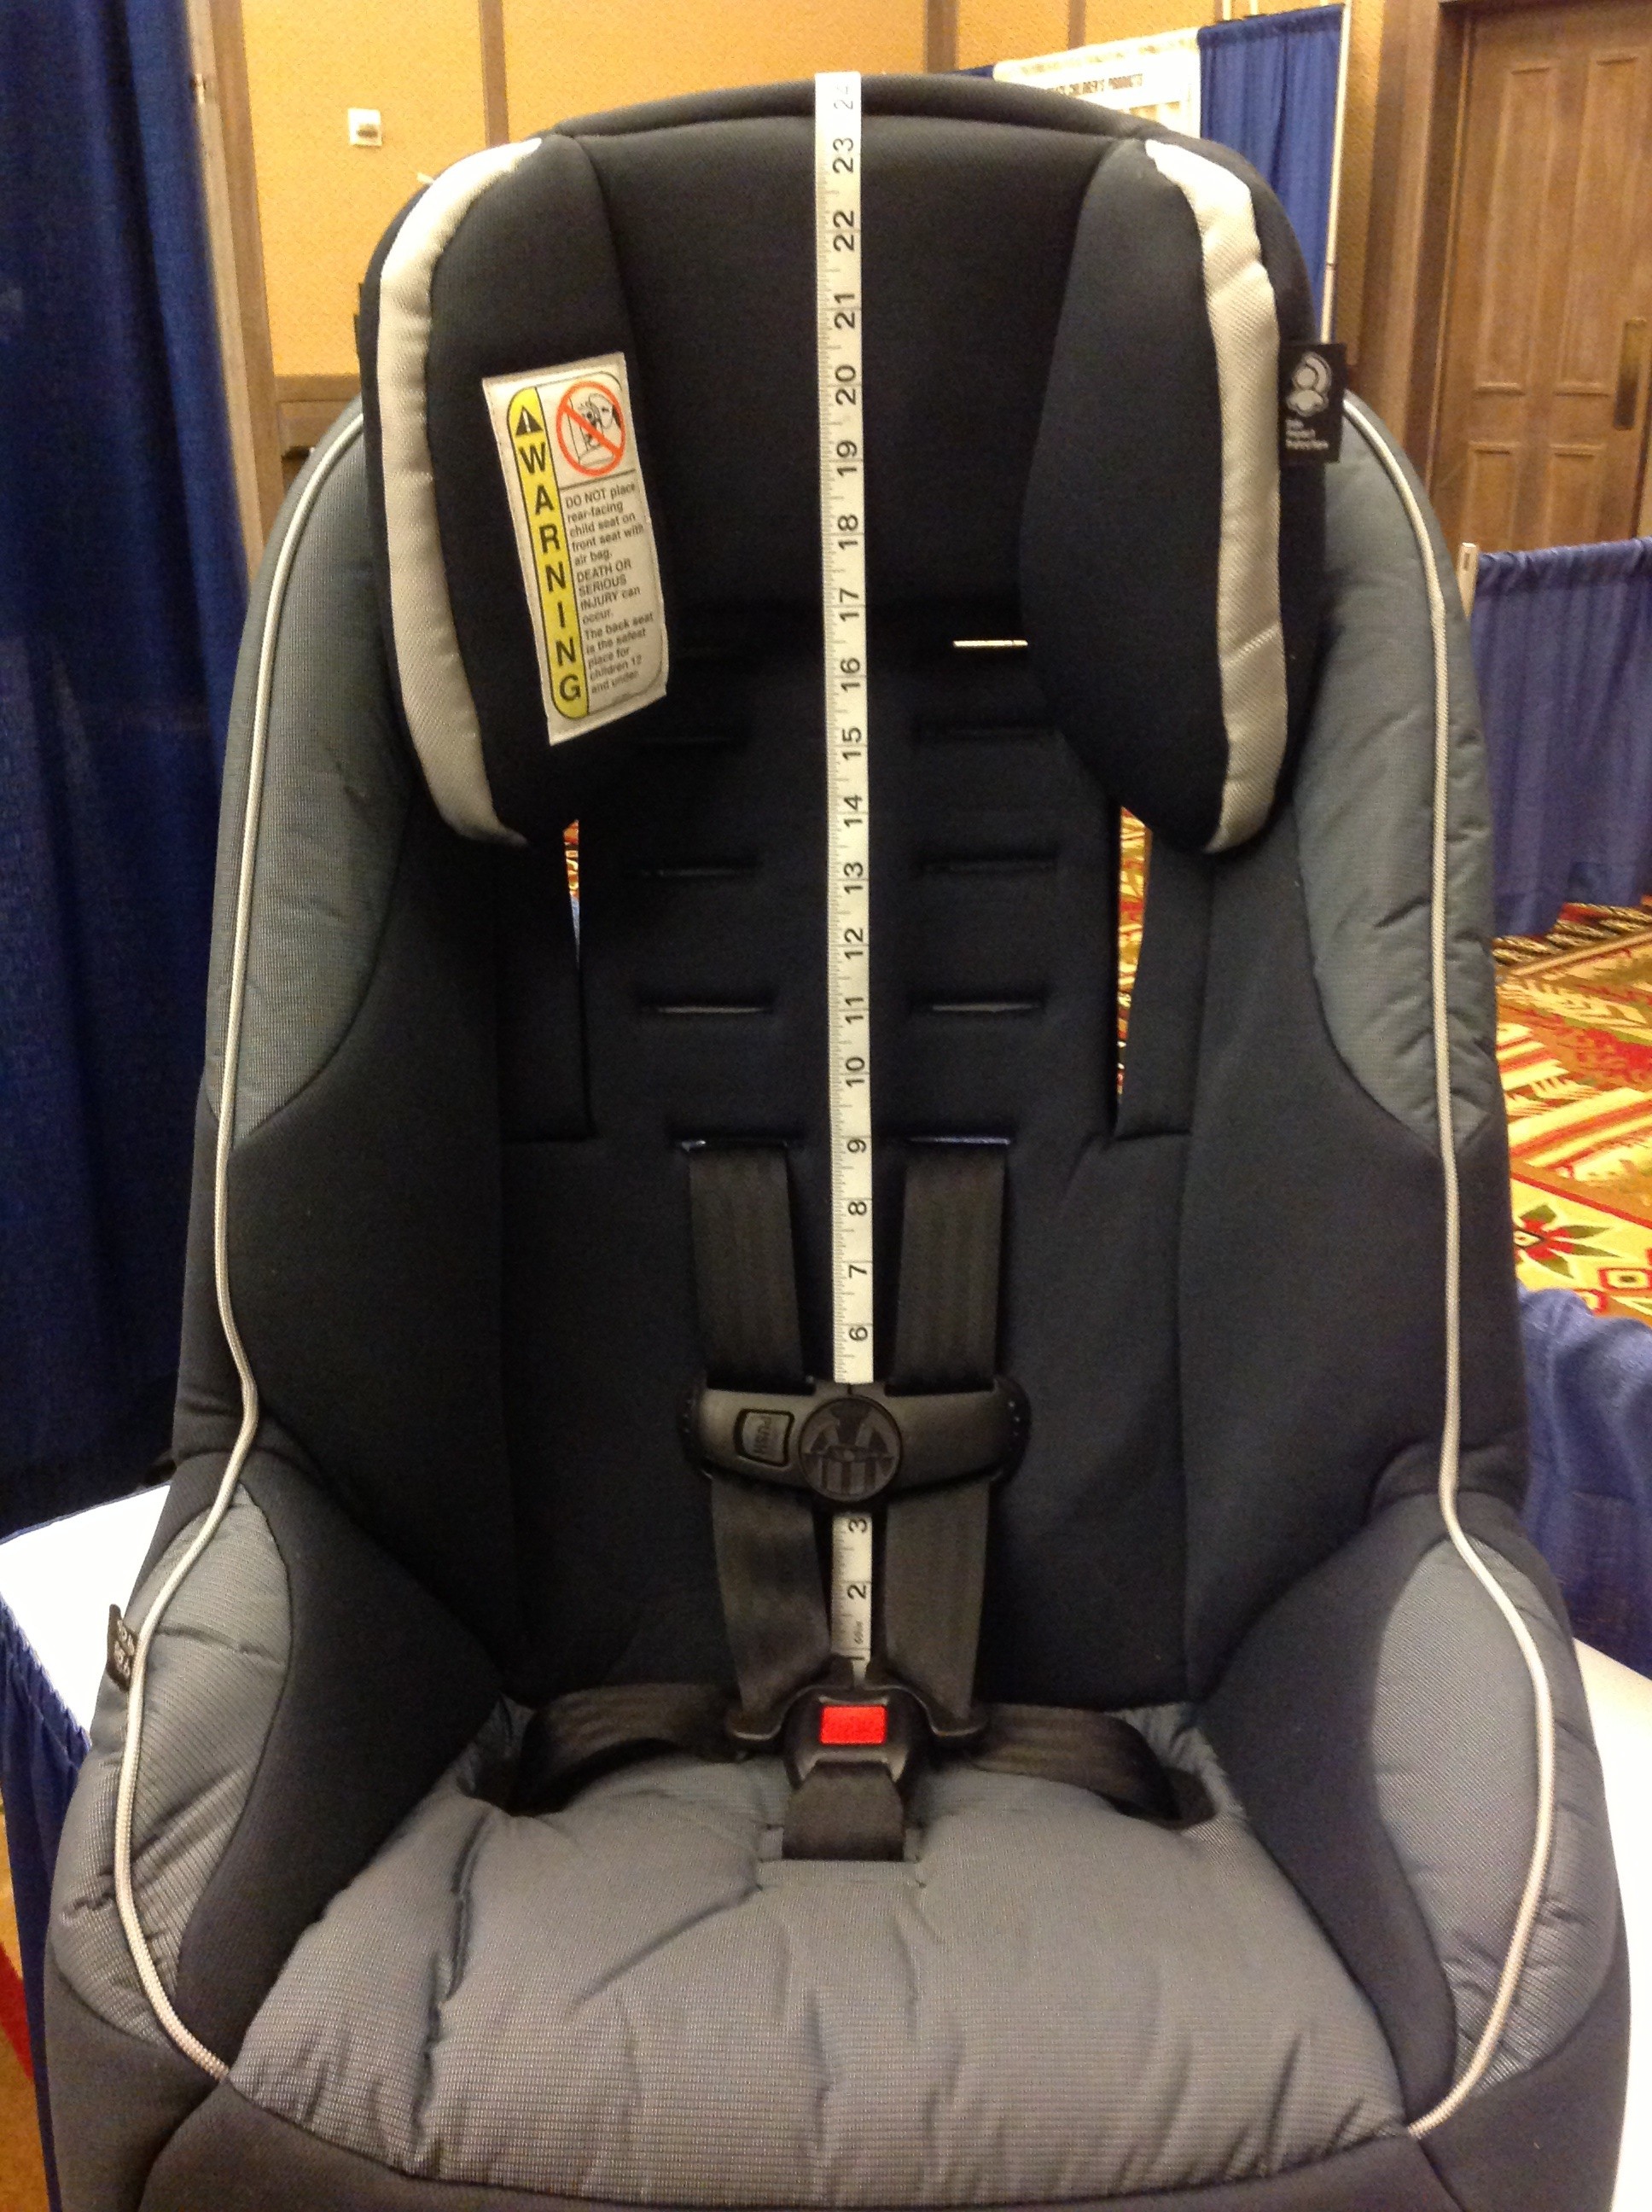 Rear Facing Convertible Seats Measurements Height Limits Weight Catblog - What Is The Maximum Height For An Infant Car Seat